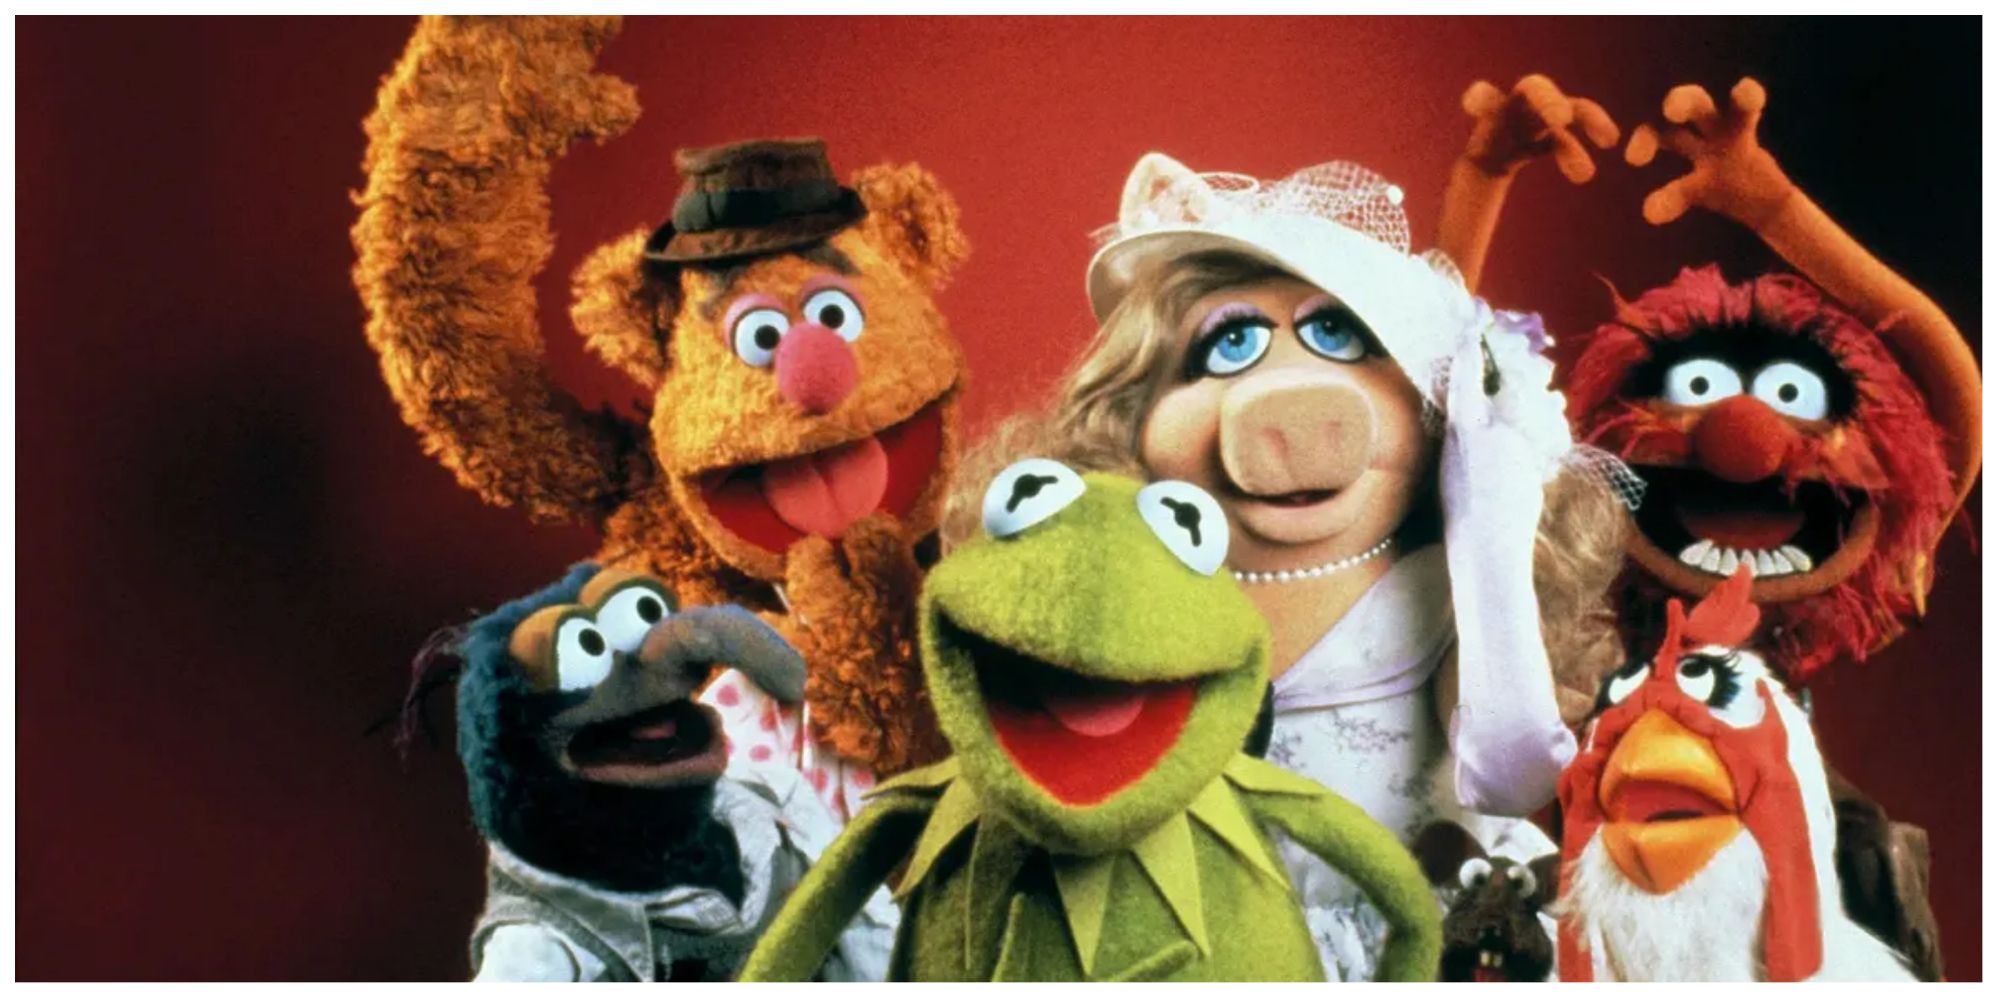 The Muppets characters in the Muppets Show 1976